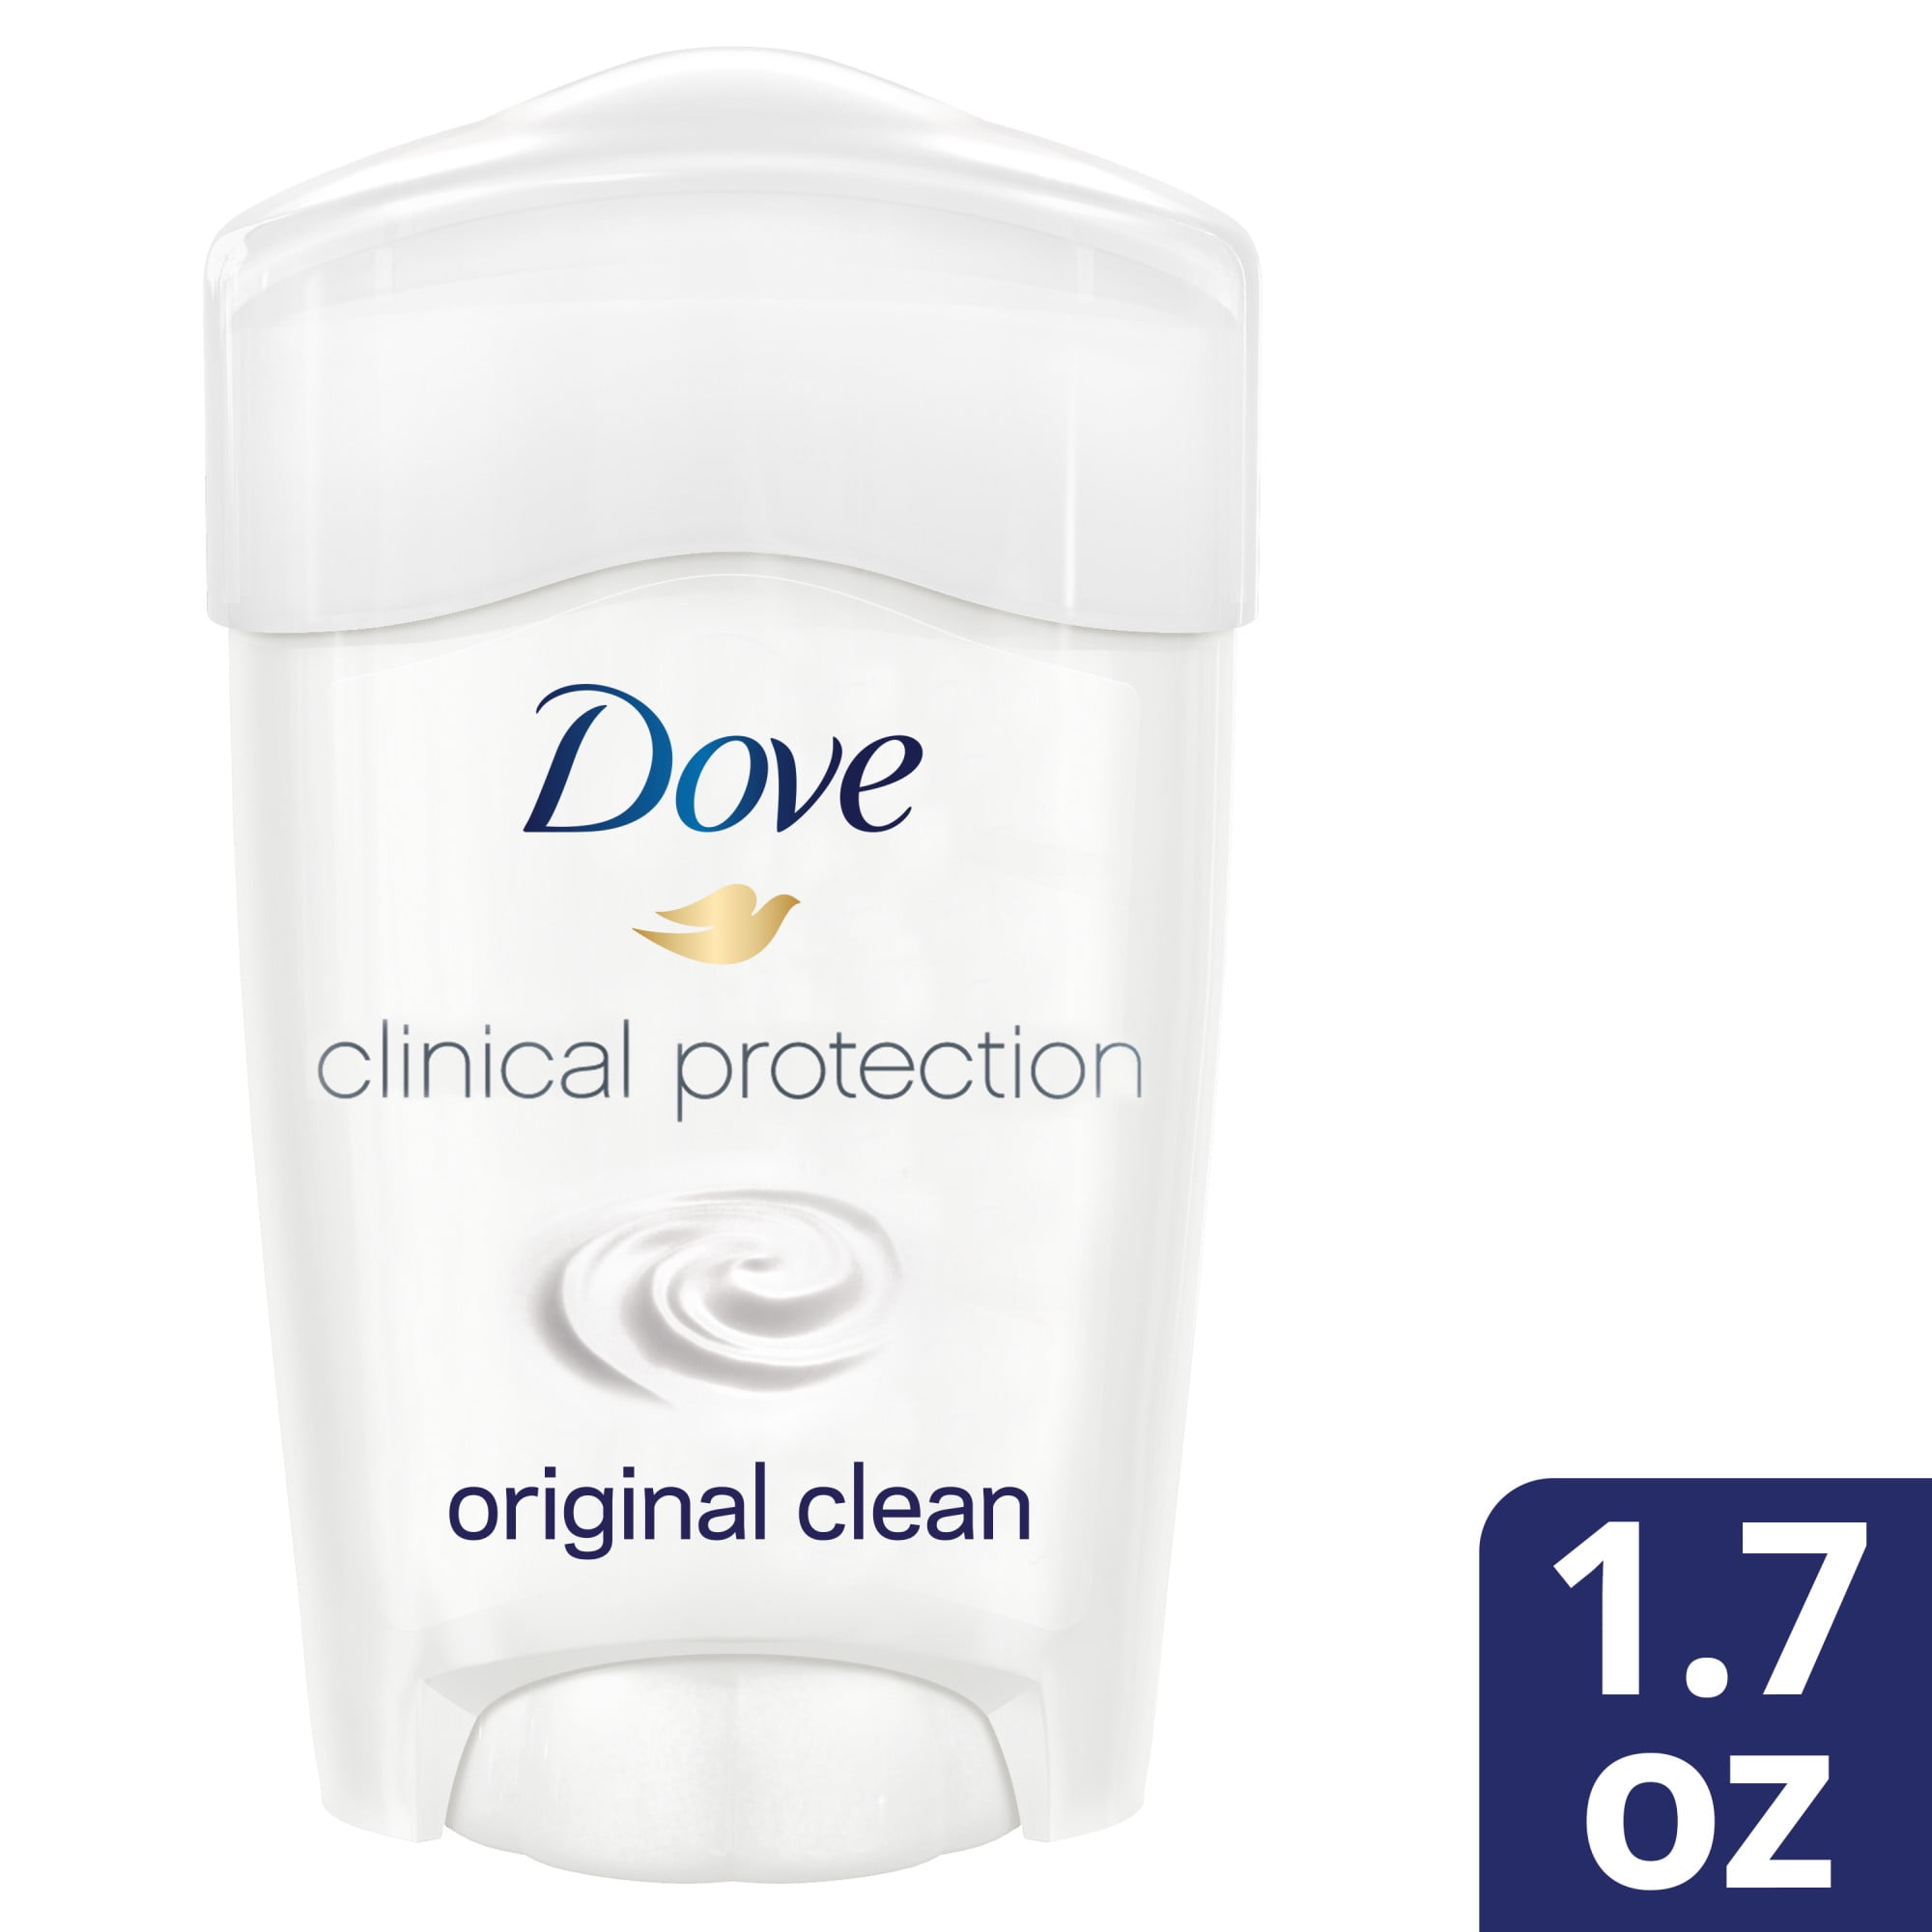 Dove Clinical Protection Antiperspirant Deodorant Original Clean Antiperspirant For Women Made With 1/4 Moisturizers For Sweat and Odor Protection 1.7 oz